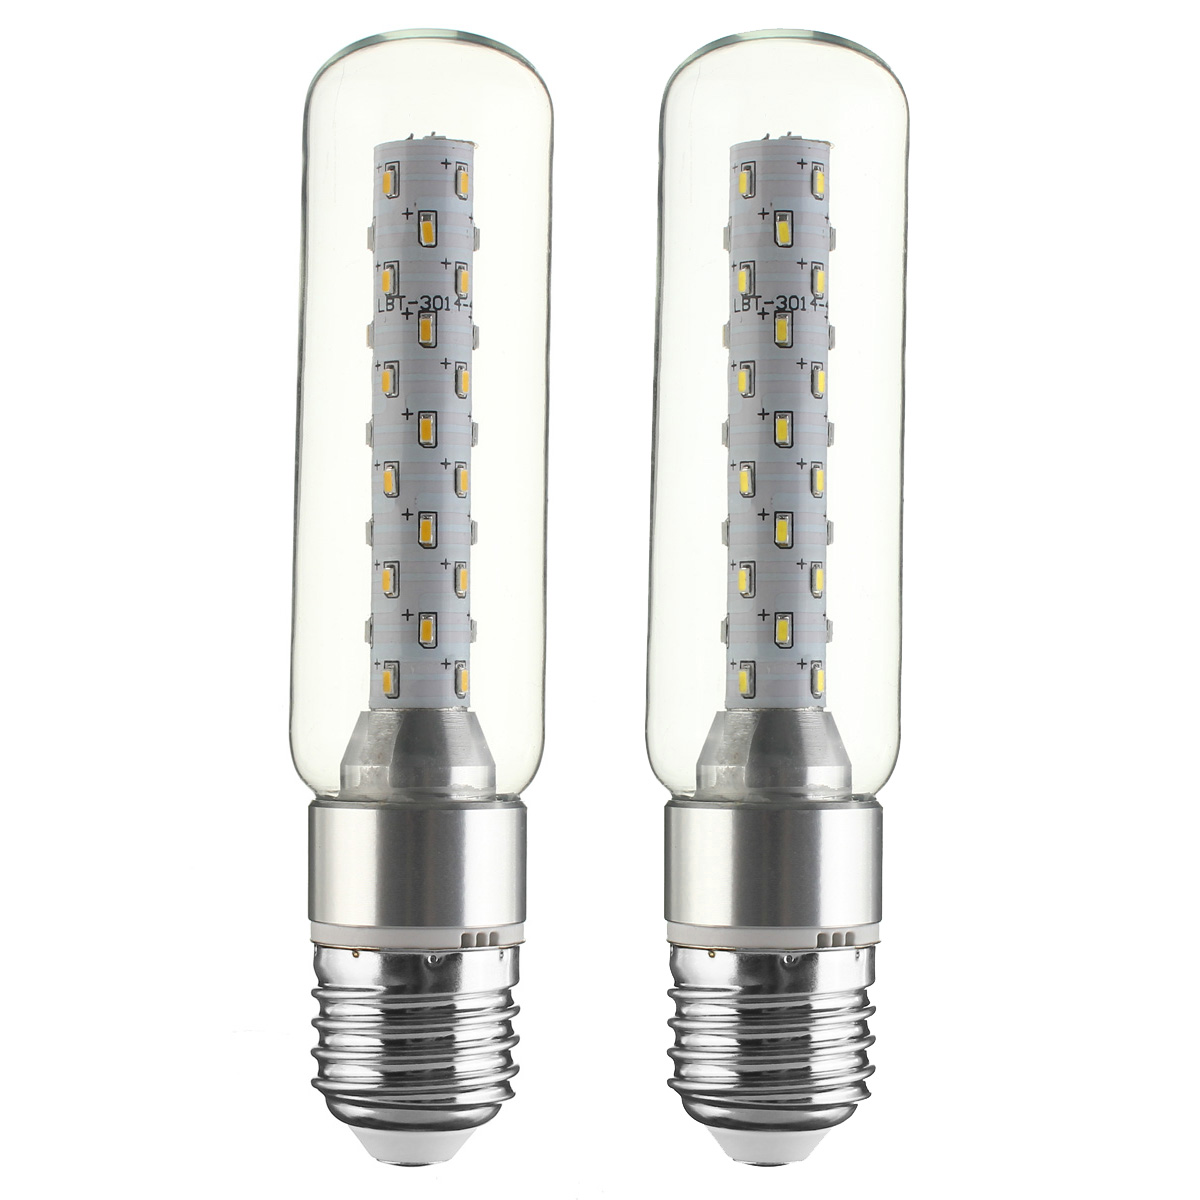 Find KINGSO 2 Pack E27/E26 T10 128 6W COB 3014 48 Led Vintage Retro SMD light Edison Style Screw Technology Tubular Nostalgic Filament Not Dimmable Pure White 6000K-6500K 600LM AC 110V for Sale on Gipsybee.com with cryptocurrencies